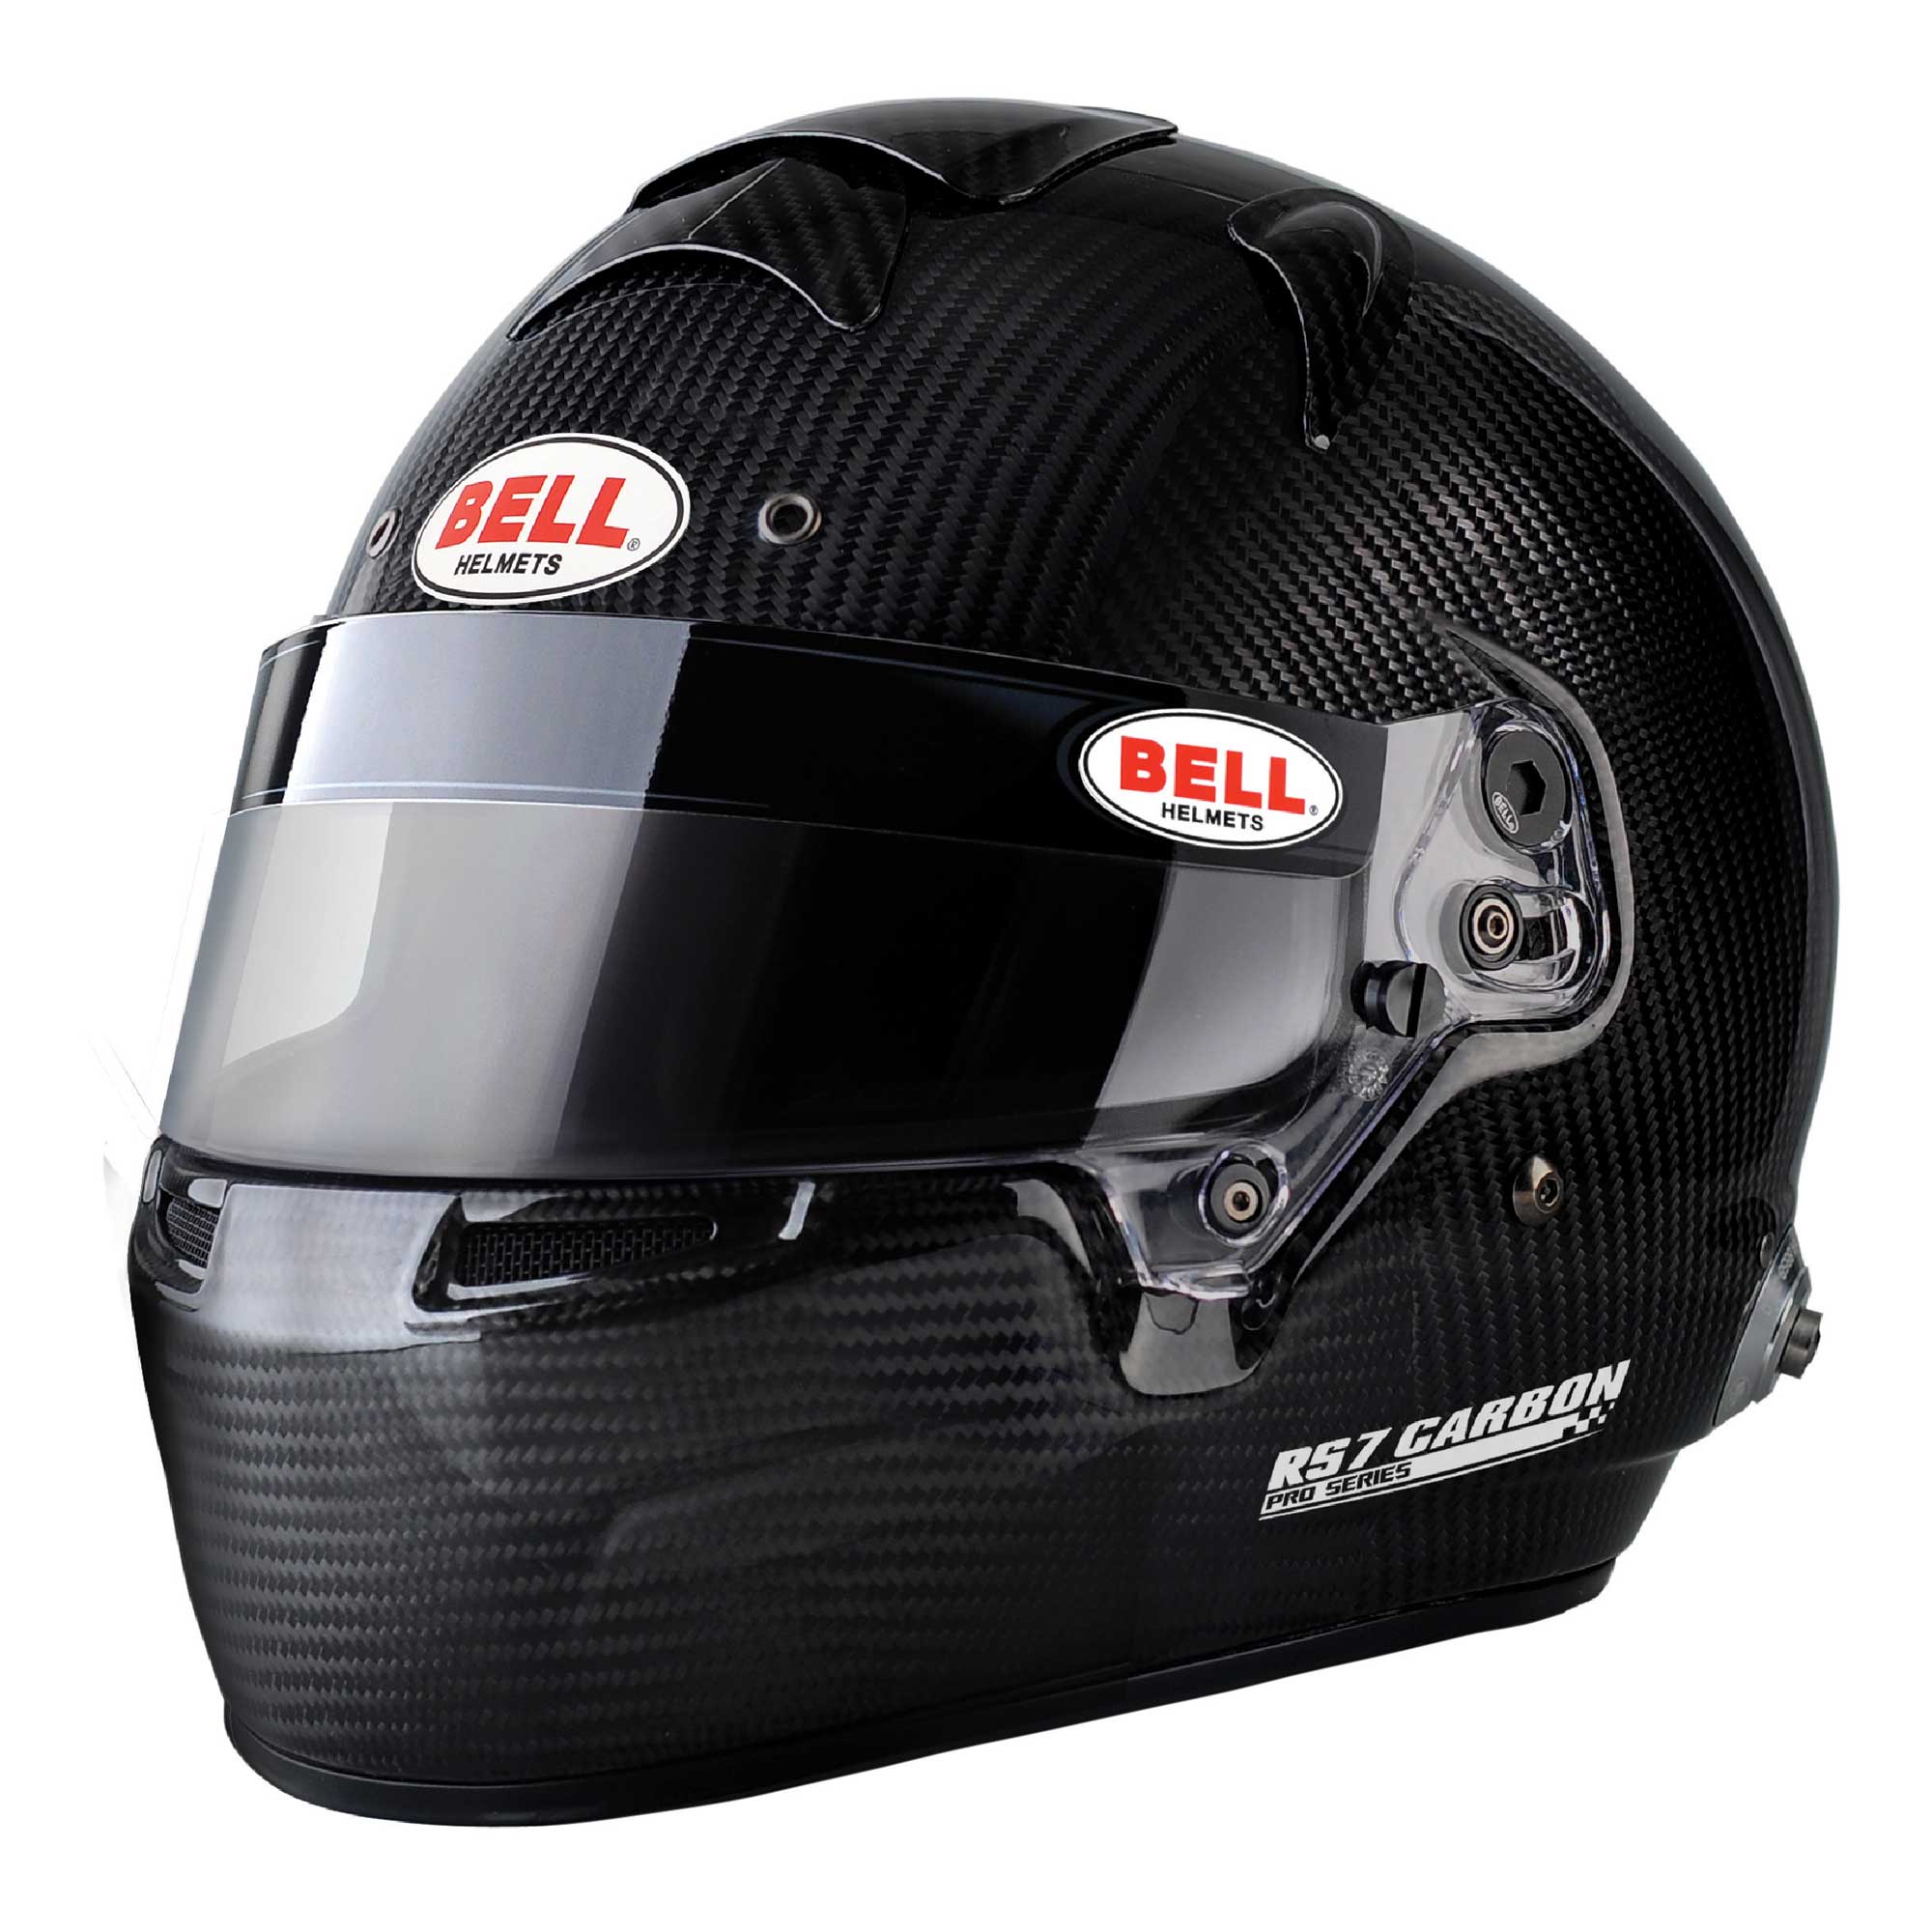 Bell RS7 Carbon Helm -